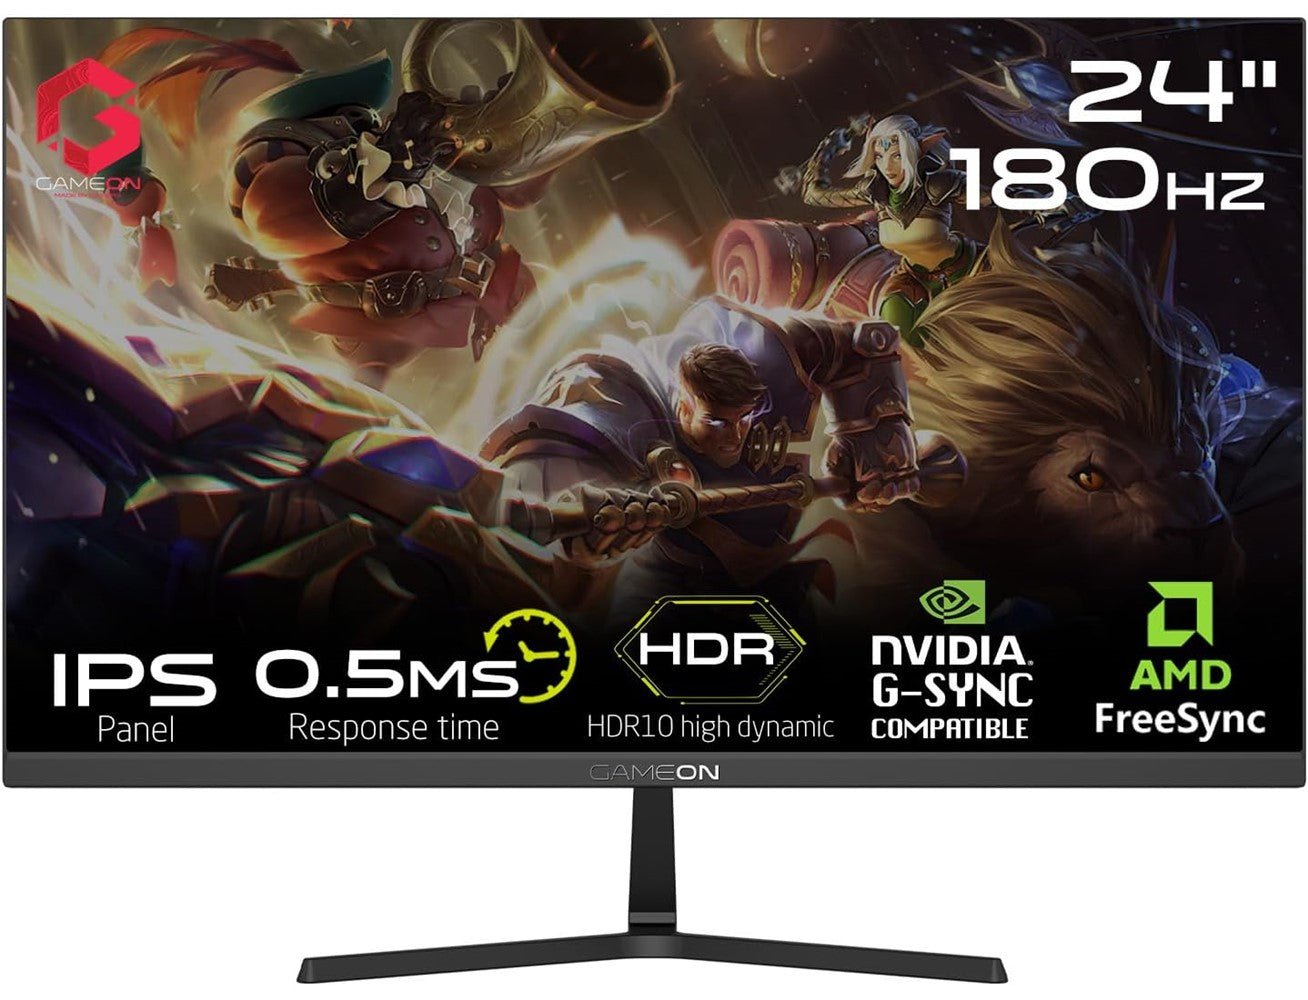 GAMEON GOPS24180IPS 24" FHD Fast IPS, 180Hz, 0.5 ms, HDMI 2.0 Gaming Monitor (Adaptive Sync and G-Sync Compatible) Level Up